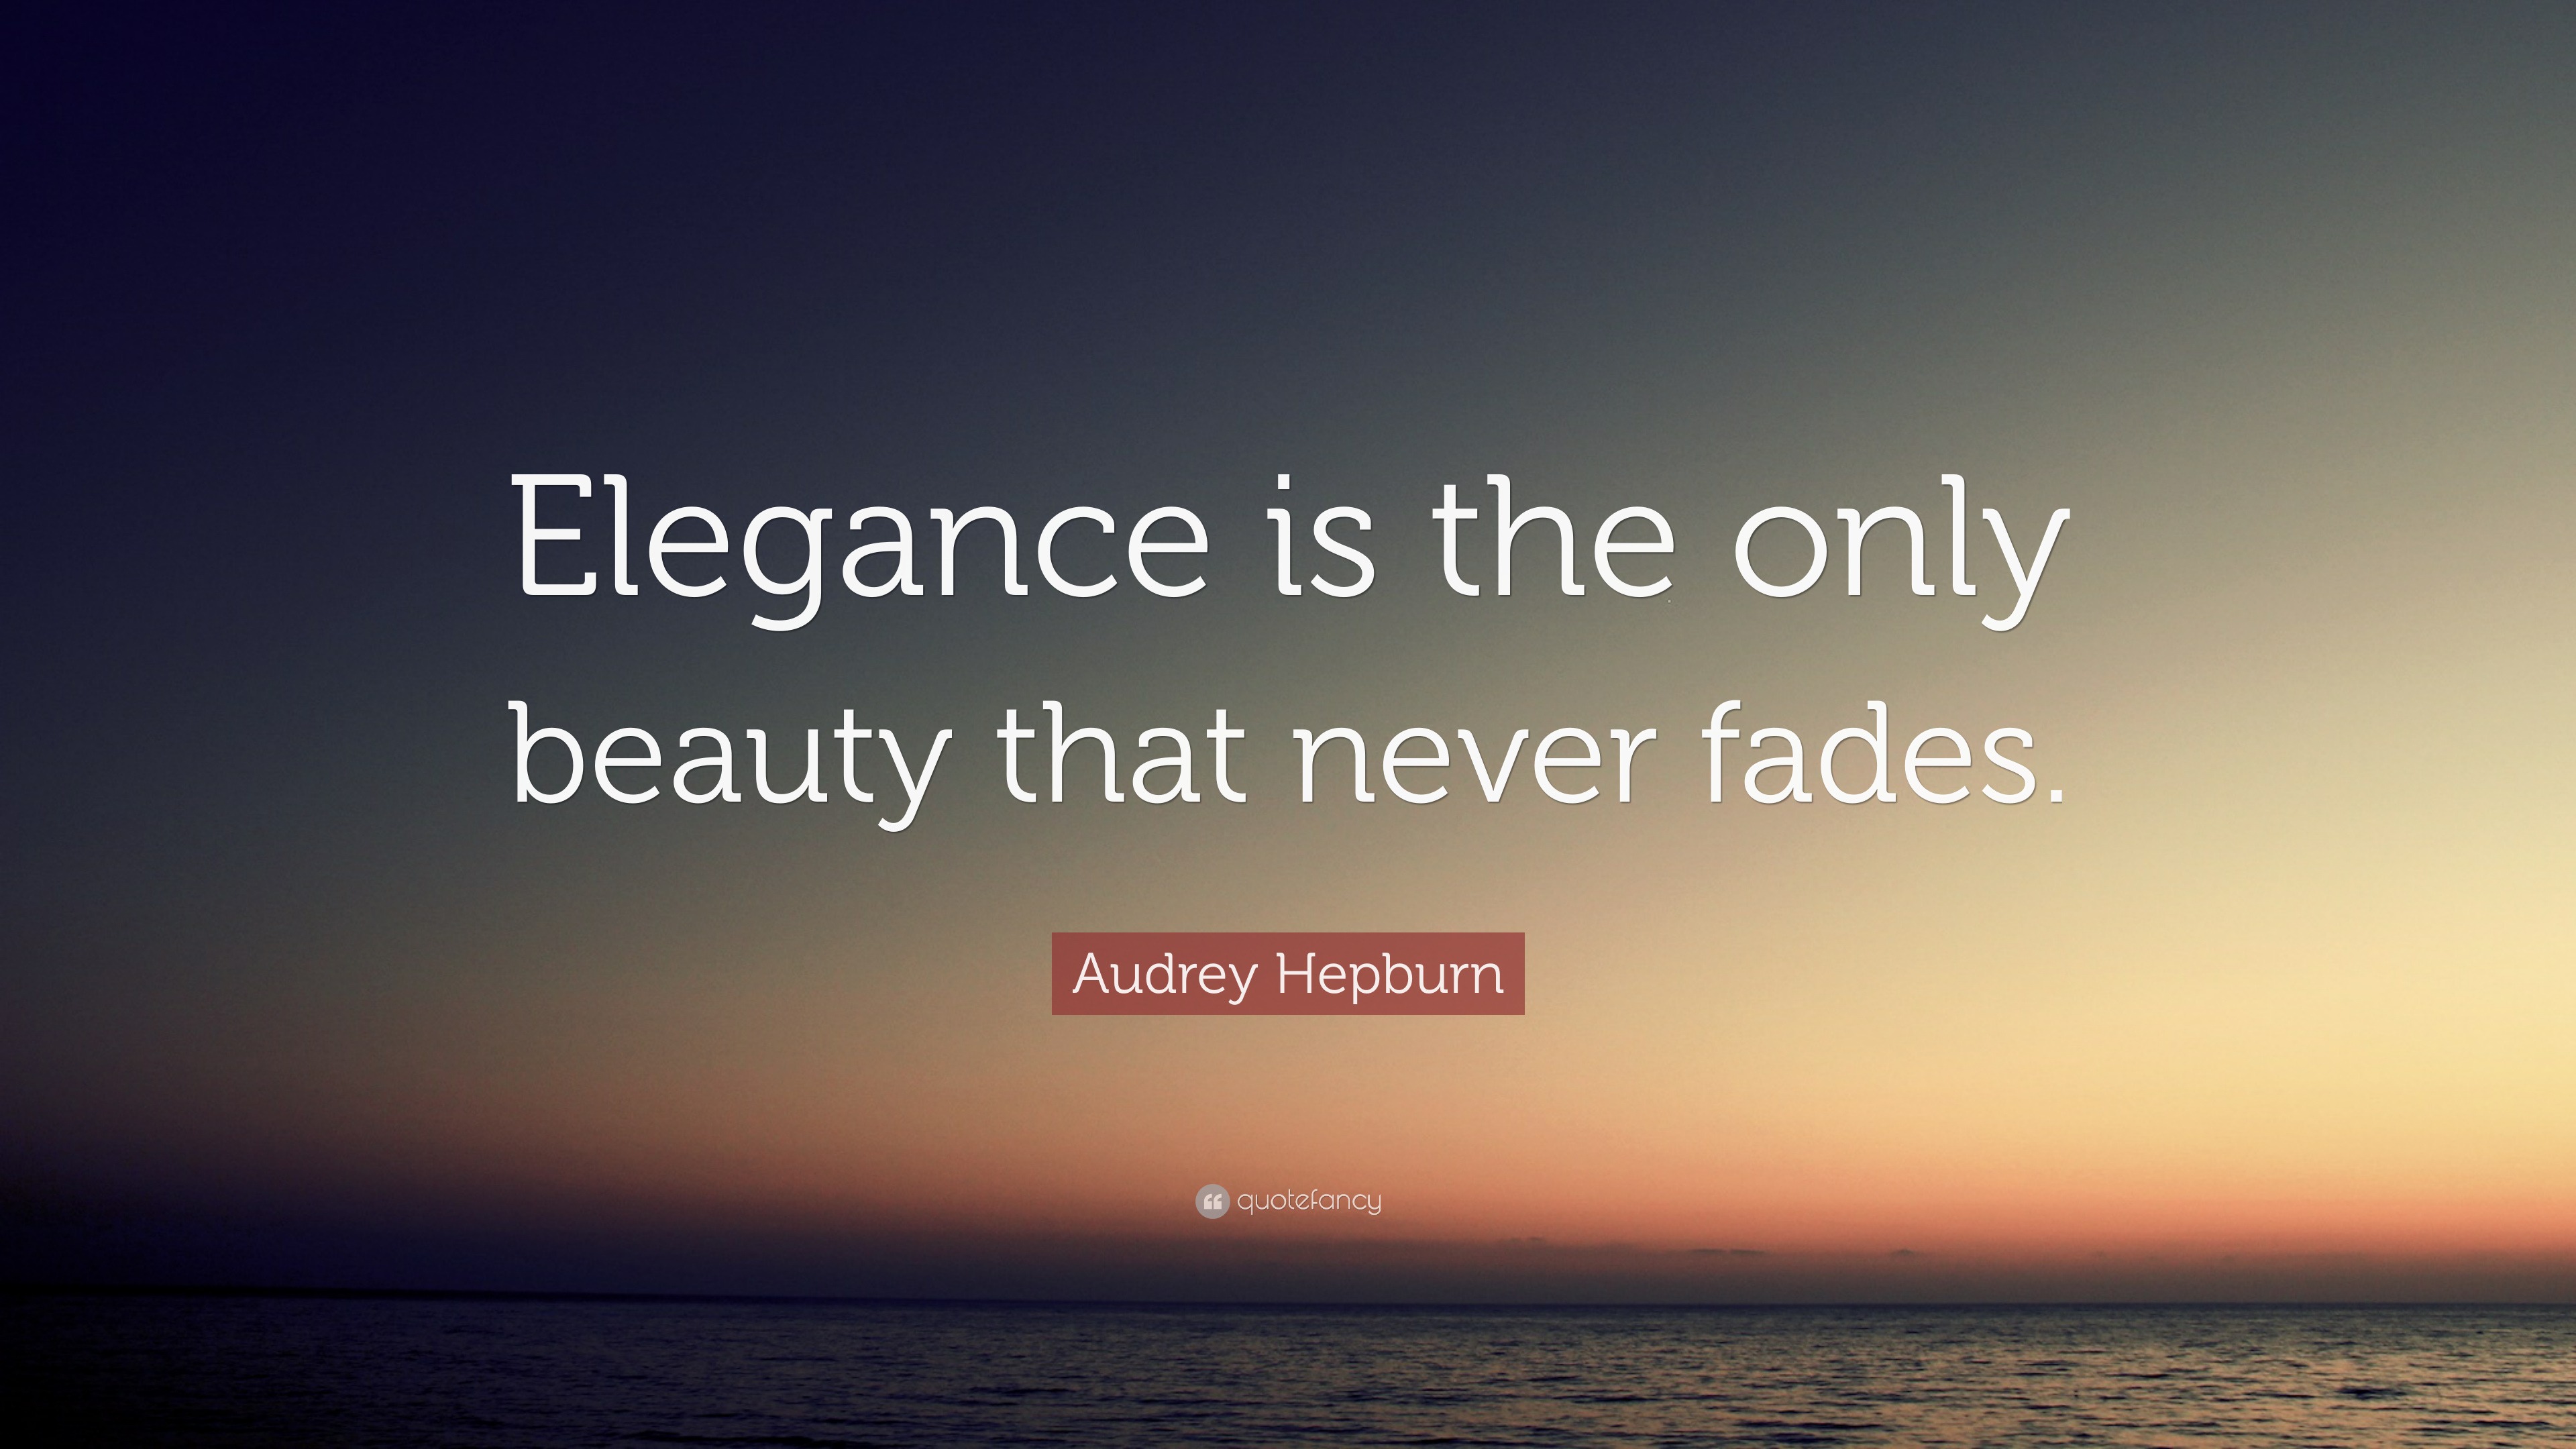 Audrey Hepburn Quote “Elegance is the only beauty that never fades ”